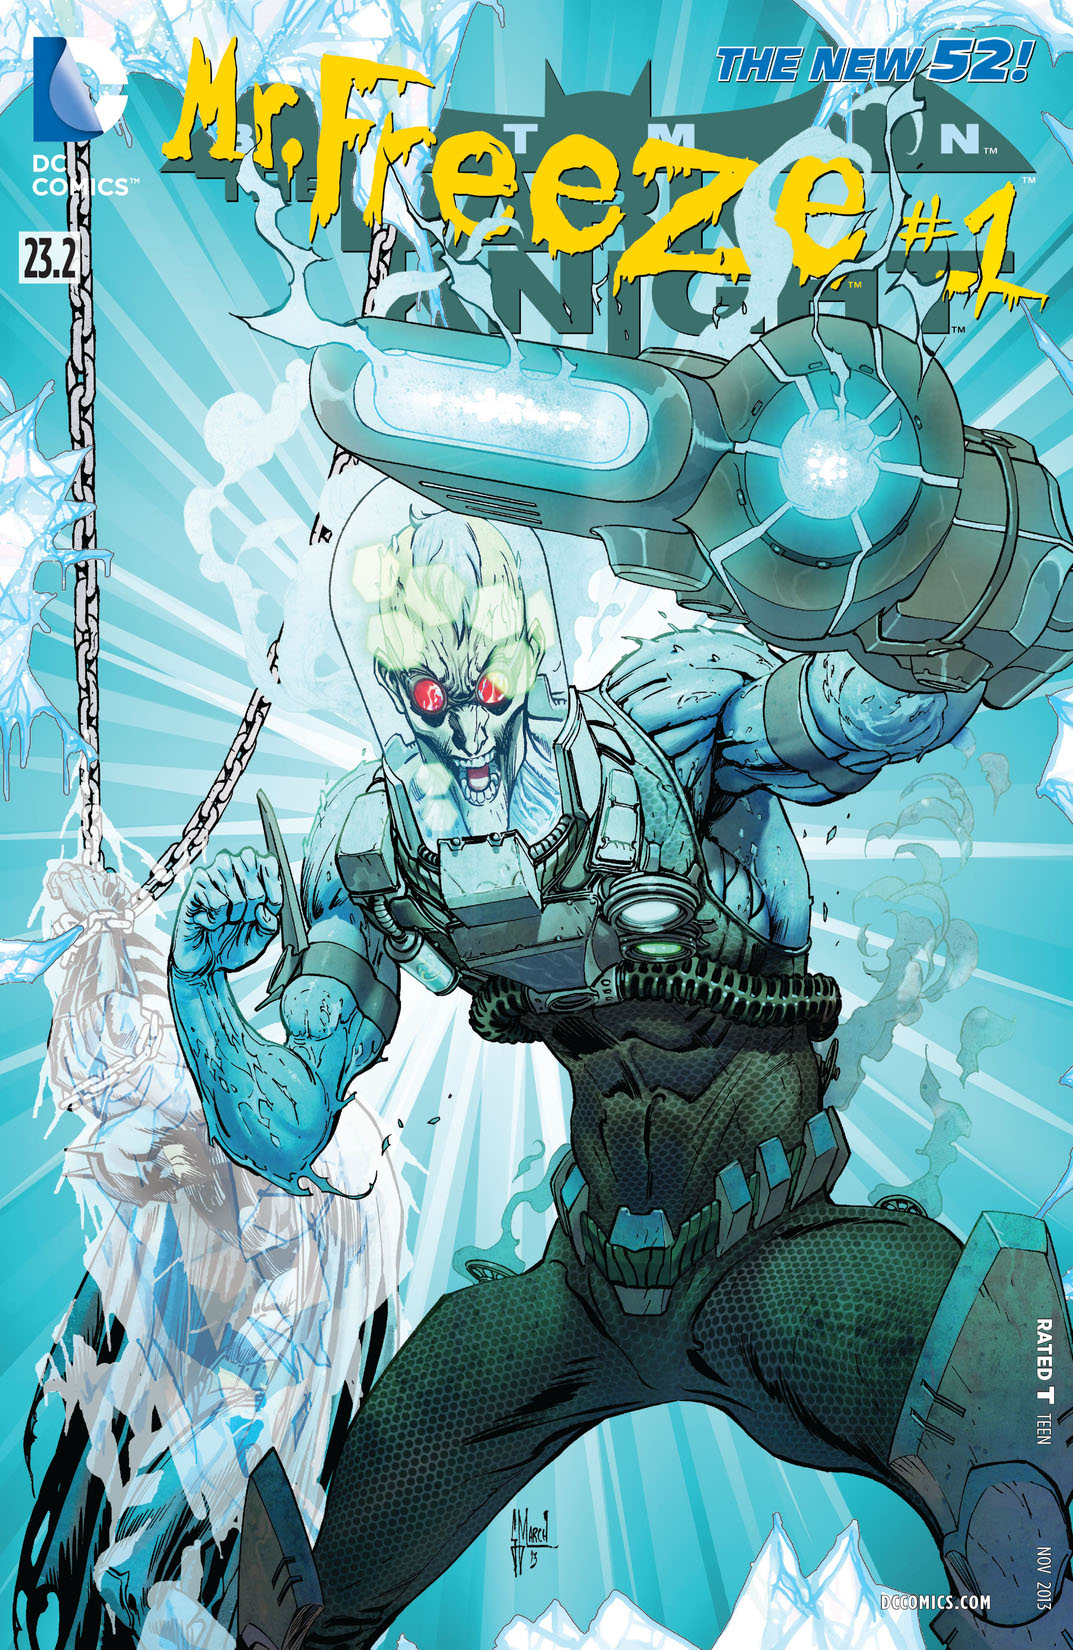 Batman: The Dark Knight feat Mr. Freeze (2013-) #23.2 preview images